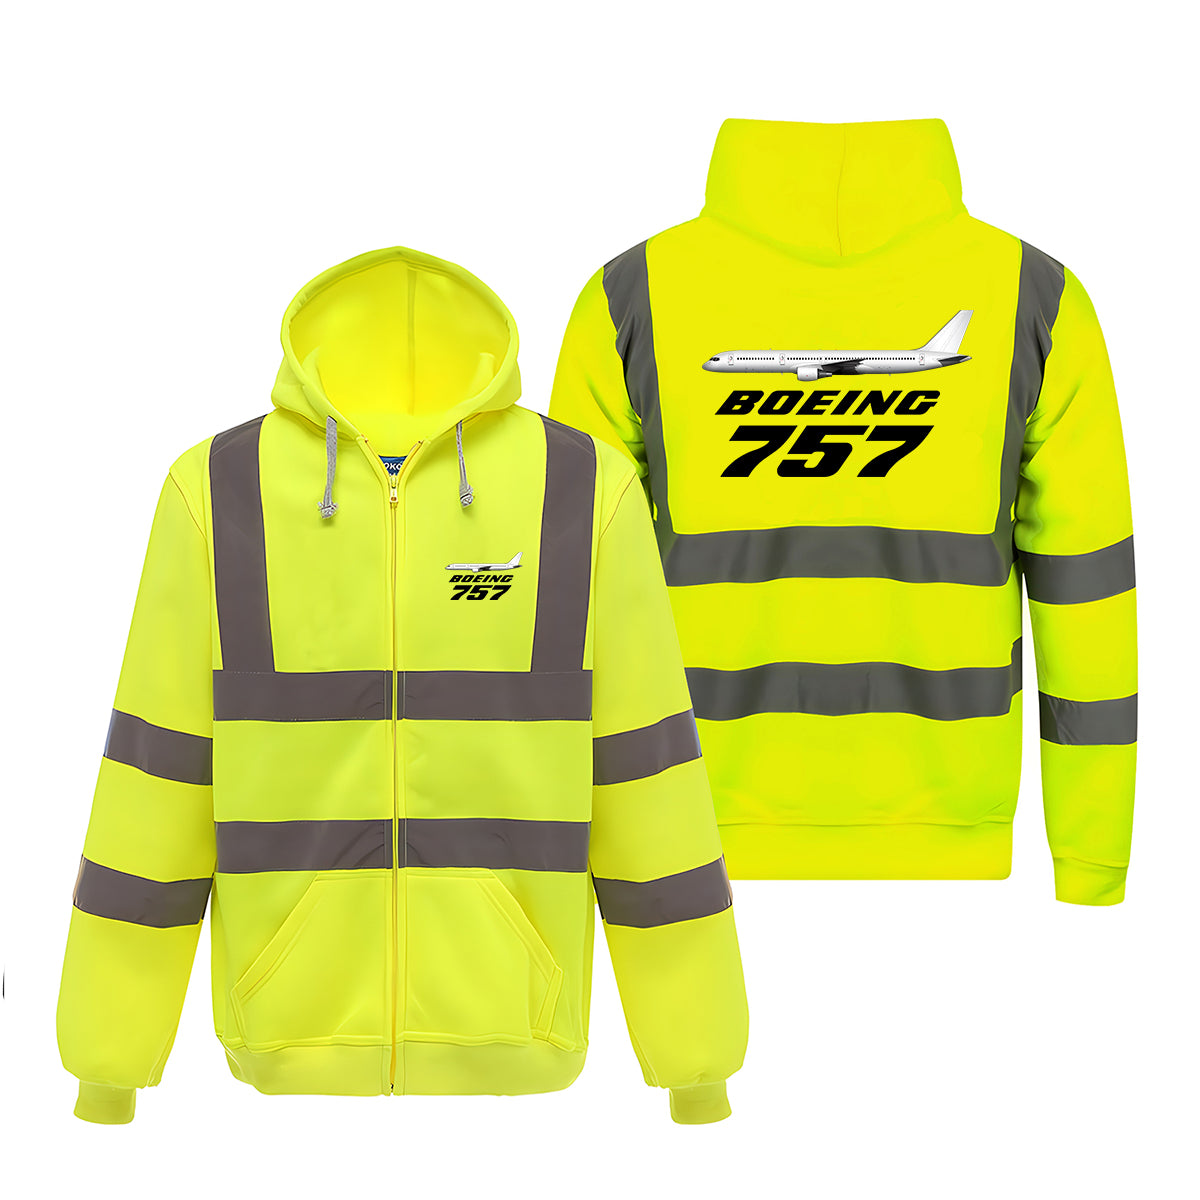 The Boeing 757 Designed Reflective Zipped Hoodies